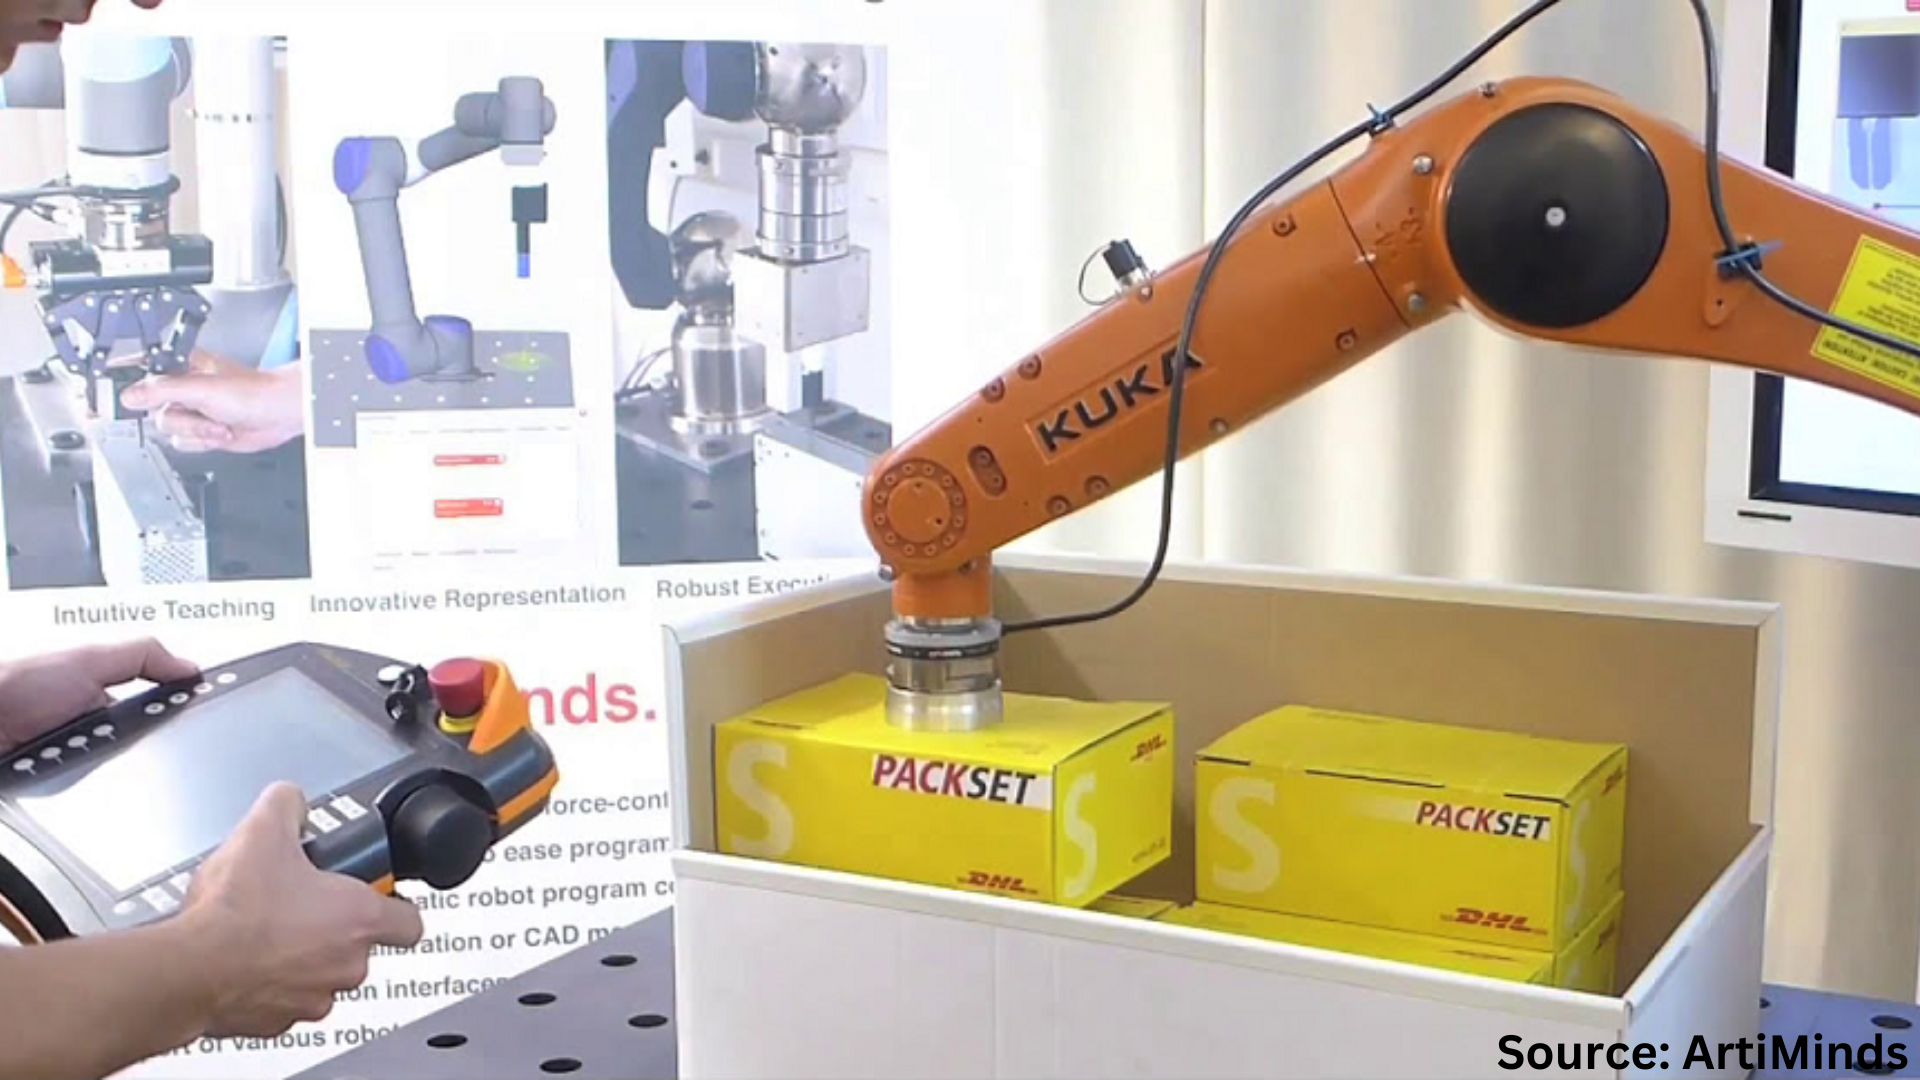 Possible SCAPE PackMover integration on a KUKA Robot for the automation of handling packages in logistics.